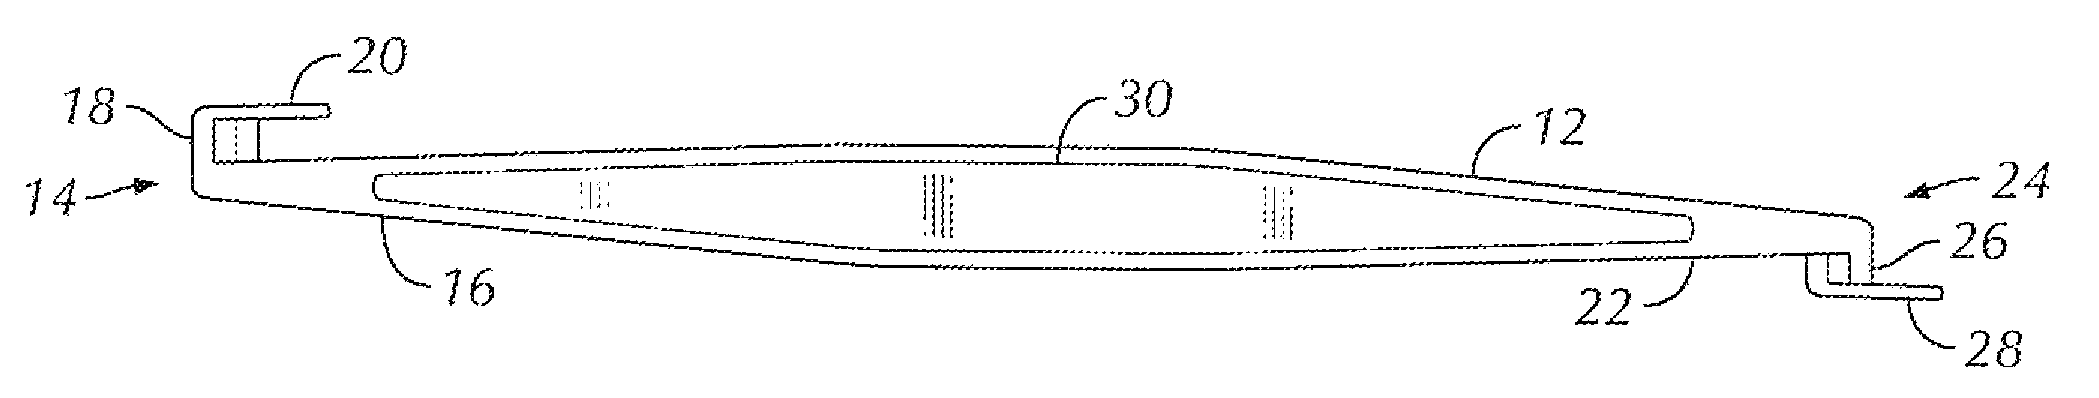 Outie tool for removal of a plastic tooth positioning appliance or aligner (invisible braces) from teeth of a patient